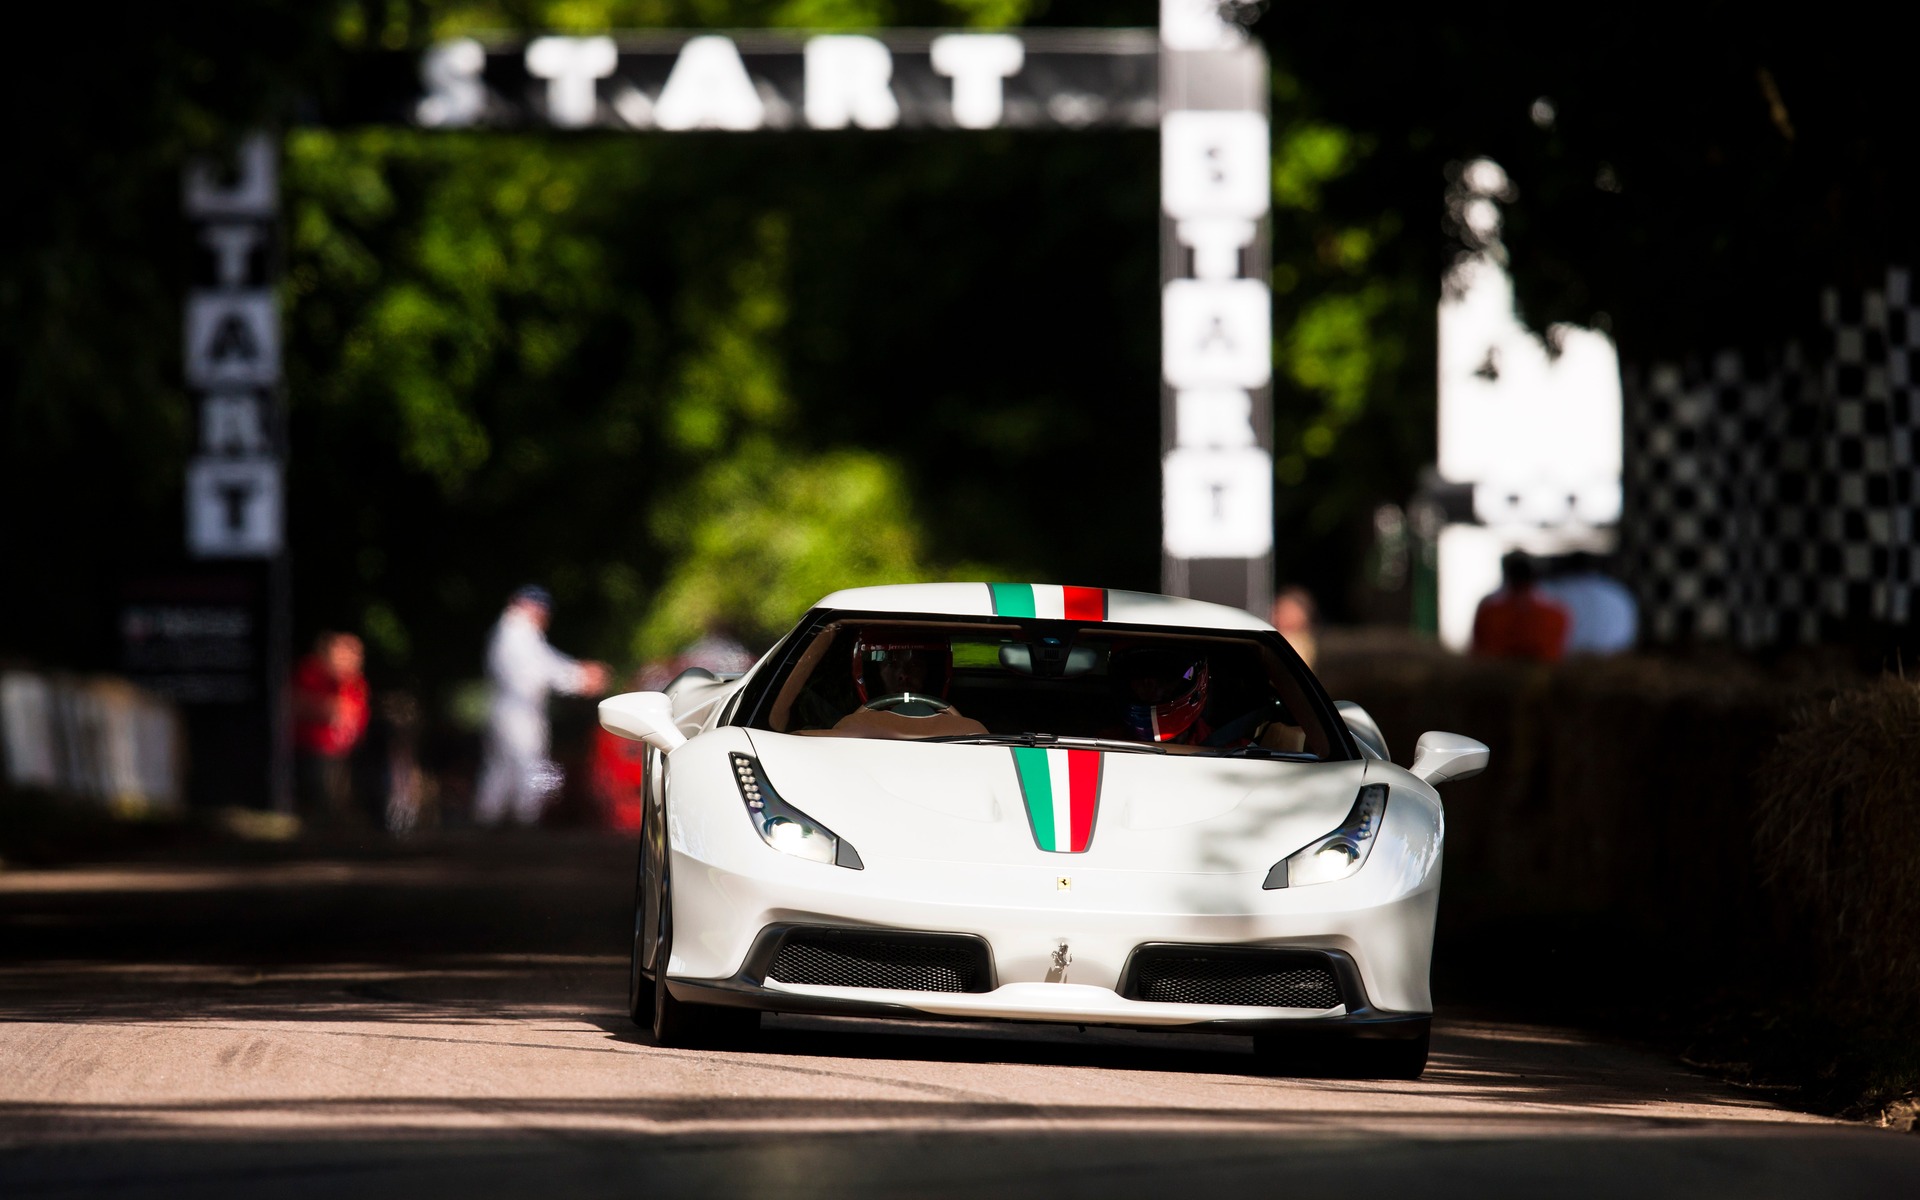 Ferrari 458 Speciale in action at the Festival of Speed 2016